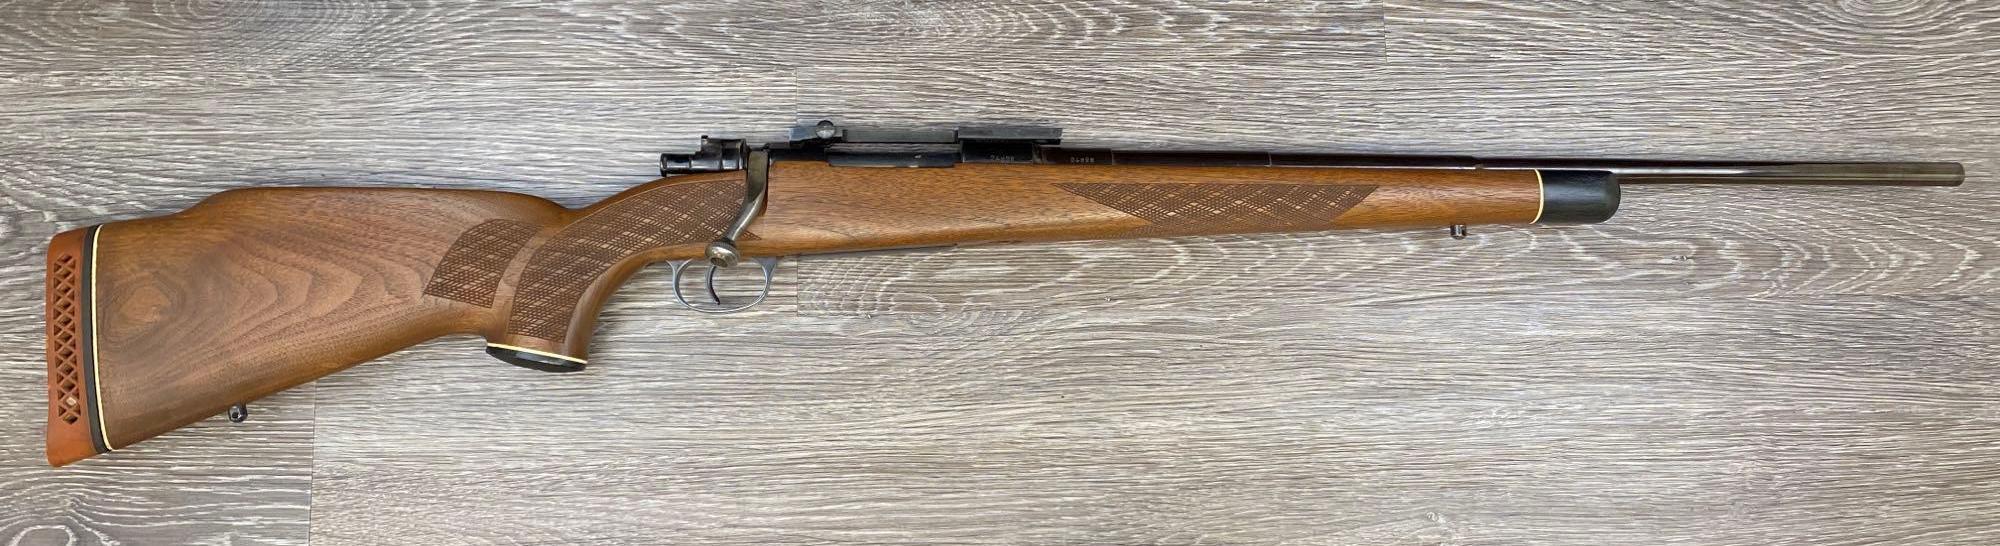 BELGIAN FN COMMERCIAL MAUSER 7 x 57 CAL. BOLT ACTION SPORTING RIFLE